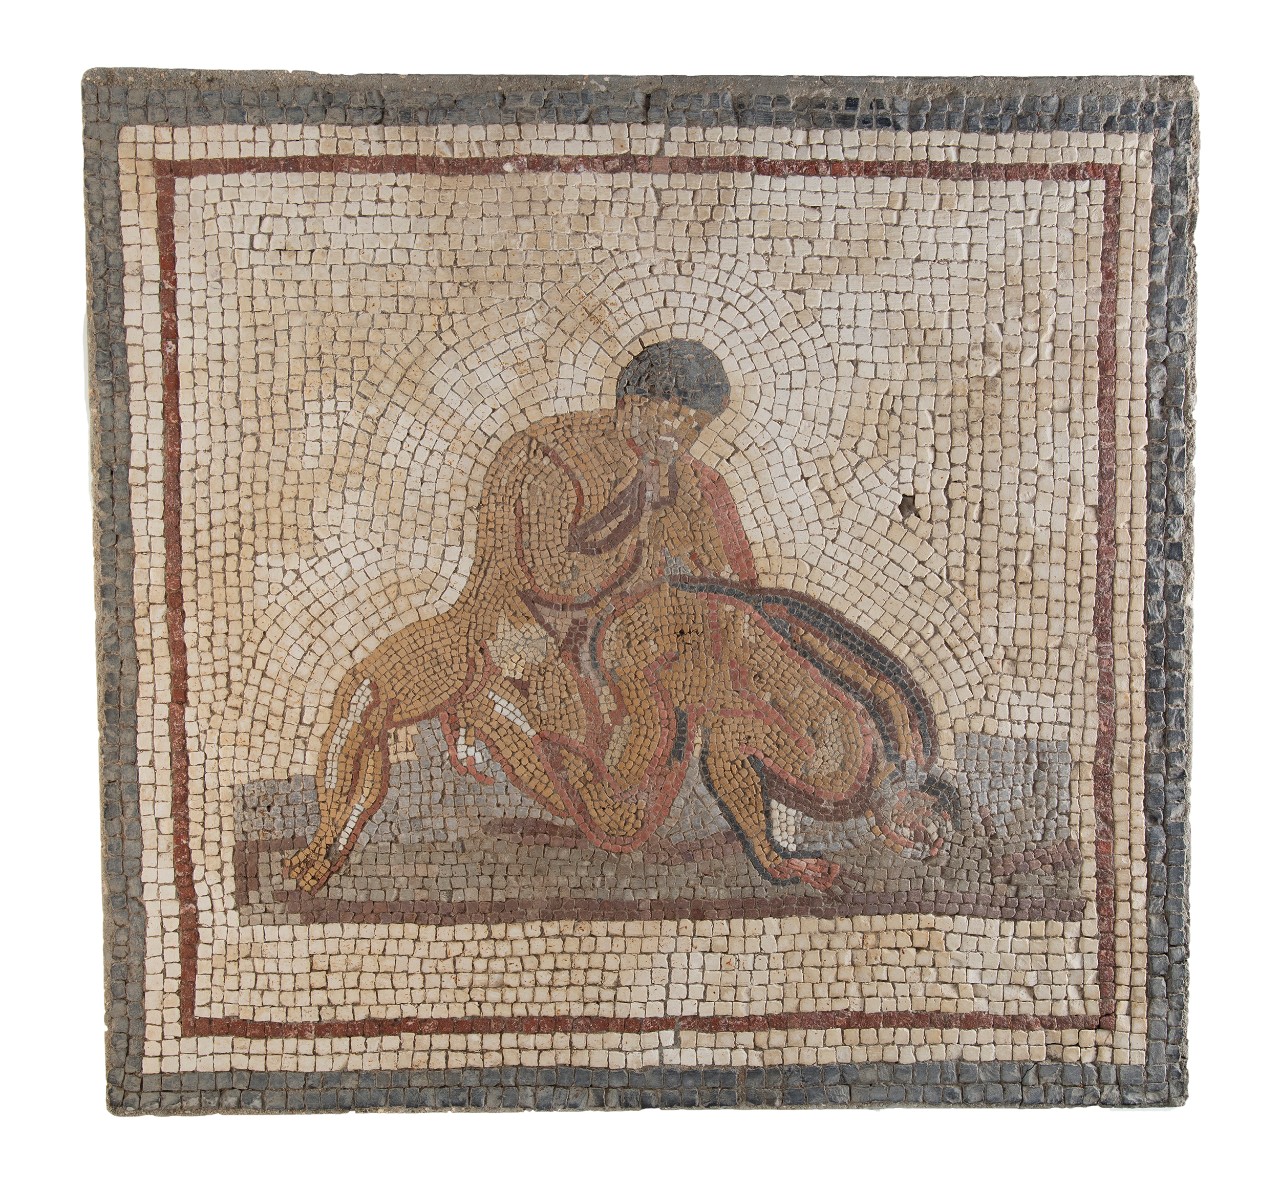 A mosaic of two wrestlers. 